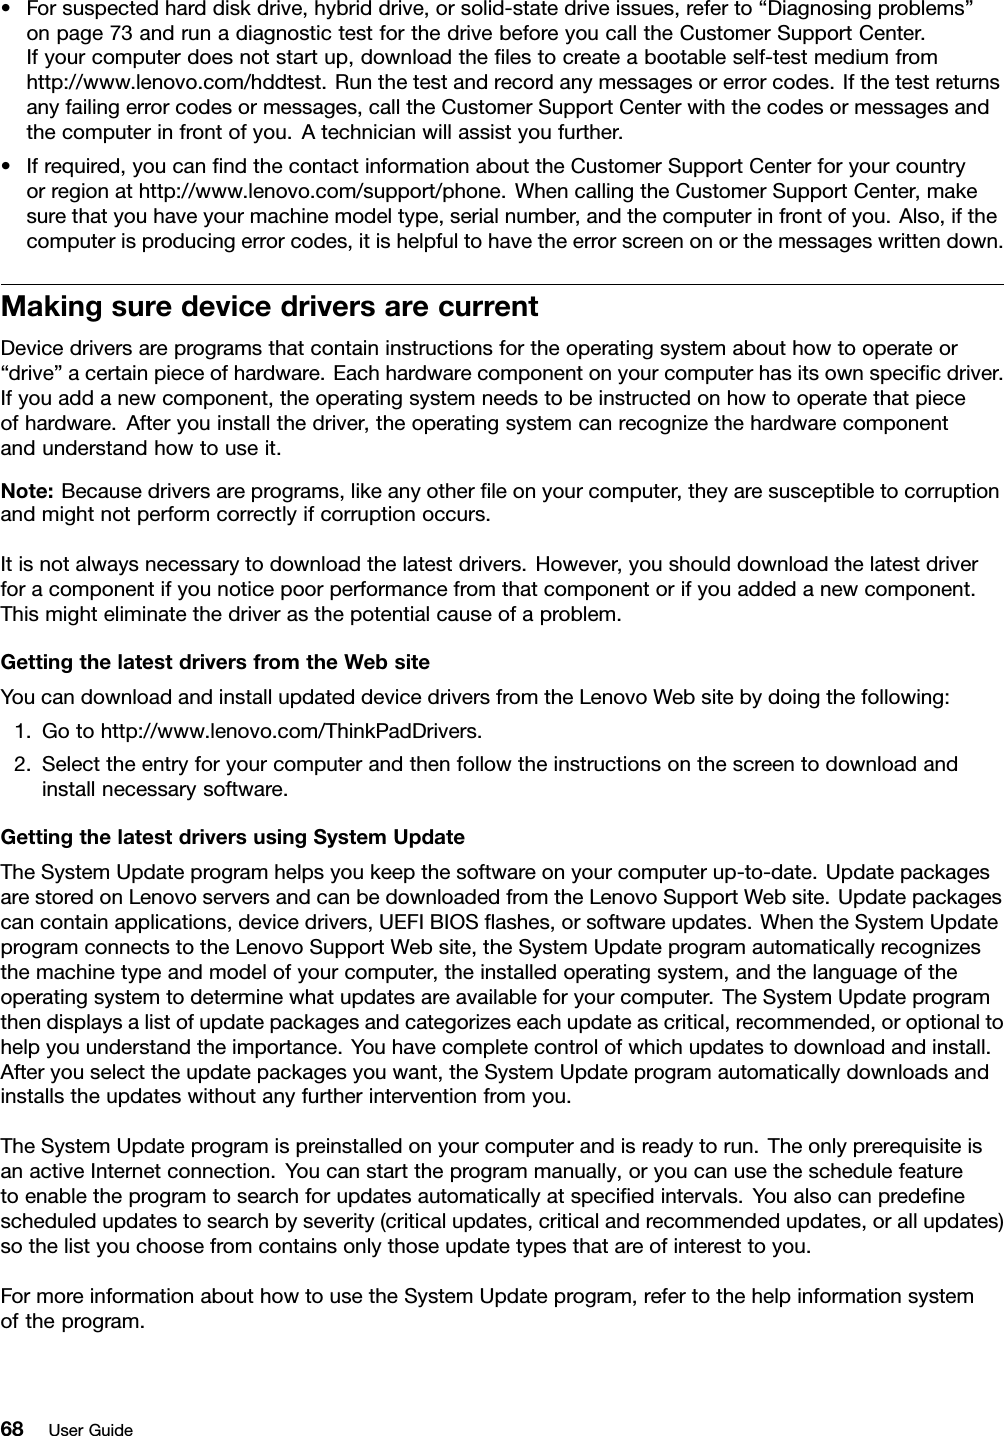 • For suspected hard disk drive, hybrid drive, or solid-state drive issues, refer to “Diagnosing problems”on page 73 and run a diagnostic test for the drive before you call the Customer Support Center.If your computer does not start up, download the ﬁles to create a bootable self-test medium fromhttp://www.lenovo.com/hddtest. Run the test and record any messages or error codes. If the test returnsany failing error codes or messages, call the Customer Support Center with the codes or messages andthe computer in front of you. A technician will assist you further.• If required, you can ﬁnd the contact information about the Customer Support Center for your countryor region at http://www.lenovo.com/support/phone. When calling the Customer Support Center, makesure that you have your machine model type, serial number, and the computer in front of you. Also, if thecomputer is producing error codes, it is helpful to have the error screen on or the messages written down.Making sure device drivers are currentDevice drivers are programs that contain instructions for the operating system about how to operate or“drive” a certain piece of hardware. Each hardware component on your computer has its own speciﬁc driver.If you add a new component, the operating system needs to be instructed on how to operate that pieceof hardware. After you install the driver, the operating system can recognize the hardware componentand understand how to use it.Note: Because drivers are programs, like any other ﬁle on your computer, they are susceptible to corruptionand might not perform correctly if corruption occurs.It is not always necessary to download the latest drivers. However, you should download the latest driverfor a component if you notice poor performance from that component or if you added a new component.This might eliminate the driver as the potential cause of a problem.Getting the latest drivers from the Web siteYou can download and install updated device drivers from the Lenovo Web site by doing the following:1. Go to http://www.lenovo.com/ThinkPadDrivers.2. Select the entry for your computer and then follow the instructions on the screen to download andinstall necessary software.Getting the latest drivers using System UpdateThe System Update program helps you keep the software on your computer up-to-date. Update packagesare stored on Lenovo servers and can be downloaded from the Lenovo Support Web site. Update packagescan contain applications, device drivers, UEFI BIOS ﬂashes, or software updates. When the System Updateprogram connects to the Lenovo Support Web site, the System Update program automatically recognizesthe machine type and model of your computer, the installed operating system, and the language of theoperating system to determine what updates are available for your computer. The System Update programthen displays a list of update packages and categorizes each update as critical, recommended, or optional tohelp you understand the importance. You have complete control of which updates to download and install.After you select the update packages you want, the System Update program automatically downloads andinstalls the updates without any further intervention from you.The System Update program is preinstalled on your computer and is ready to run. The only prerequisite isan active Internet connection. You can start the program manually, or you can use the schedule featureto enable the program to search for updates automatically at speciﬁed intervals. You also can predeﬁnescheduled updates to search by severity (critical updates, critical and recommended updates, or all updates)so the list you choose from contains only those update types that are of interest to you.For more information about how to use the System Update program, refer to the help information systemof the program.68 User Guide